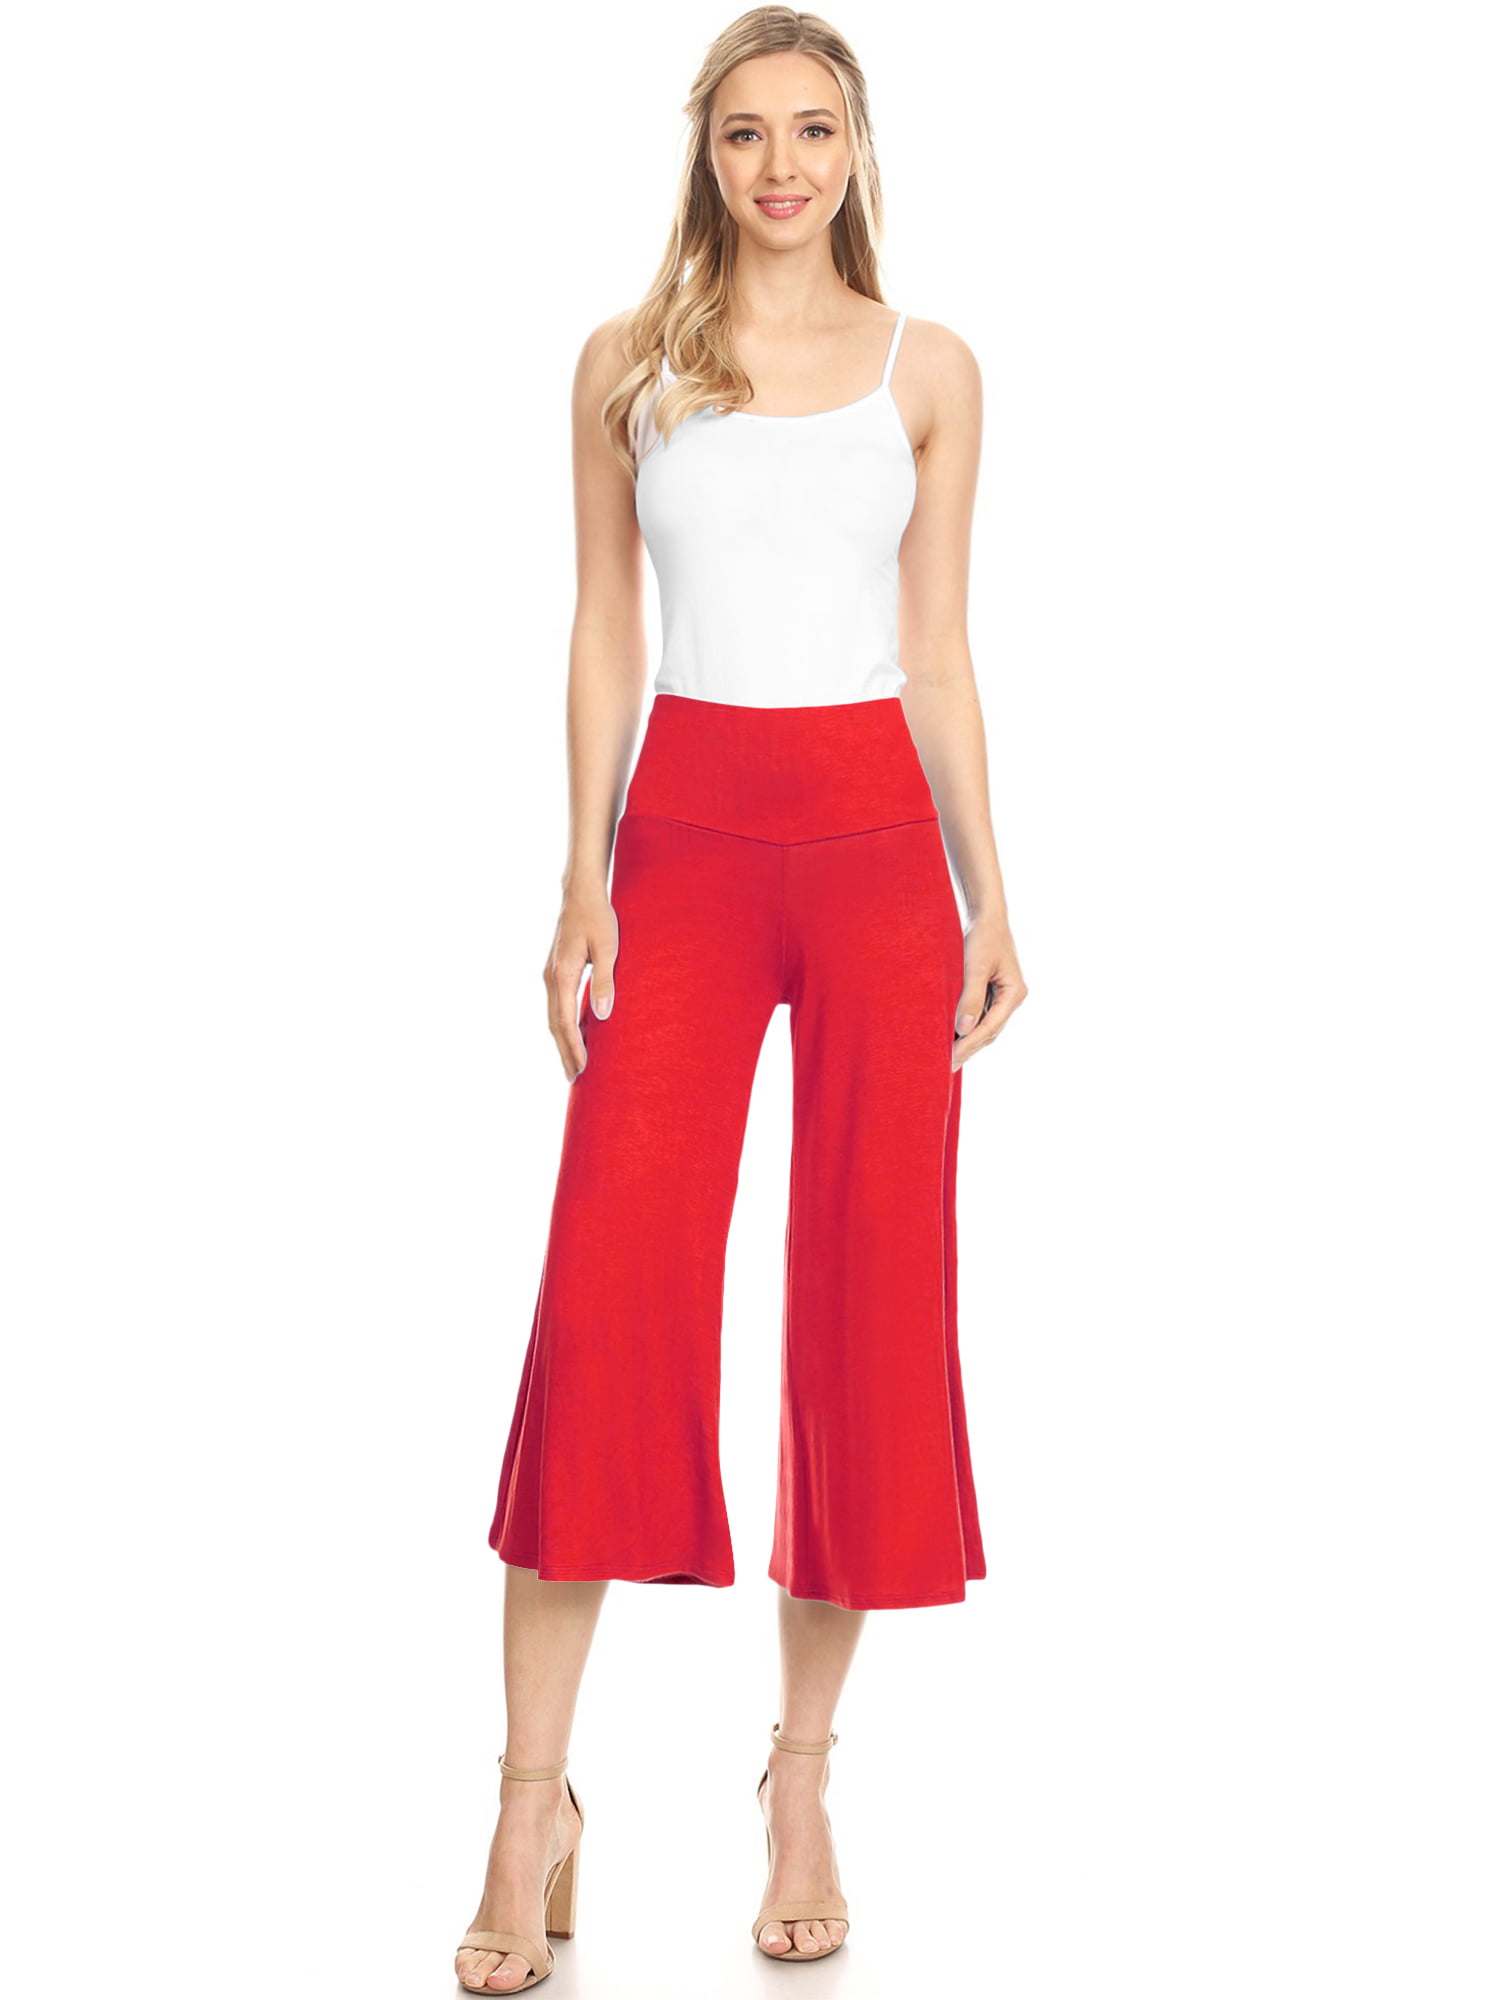 L Women\'s Pants RED by Made Culottes Knit Johnny